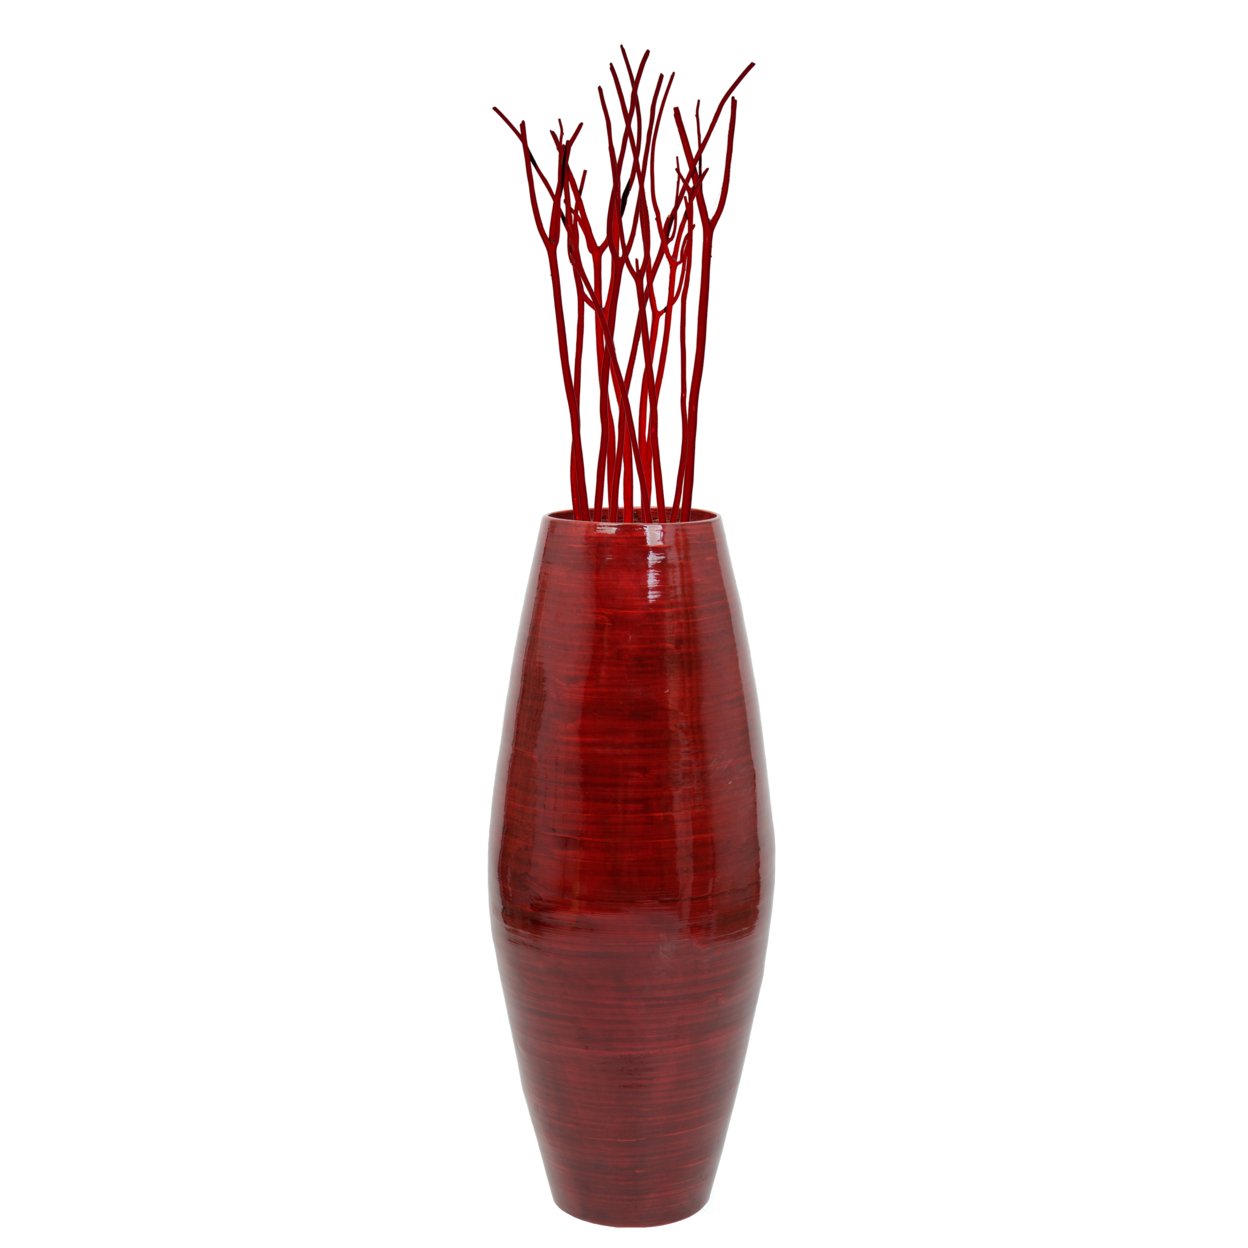 Uniquewise Bamboo Cylinder Shaped Floor Vase - Handcrafted Tall Decorative Vase - Ideal For Dining Room, Living Room, And Entryway - Natural